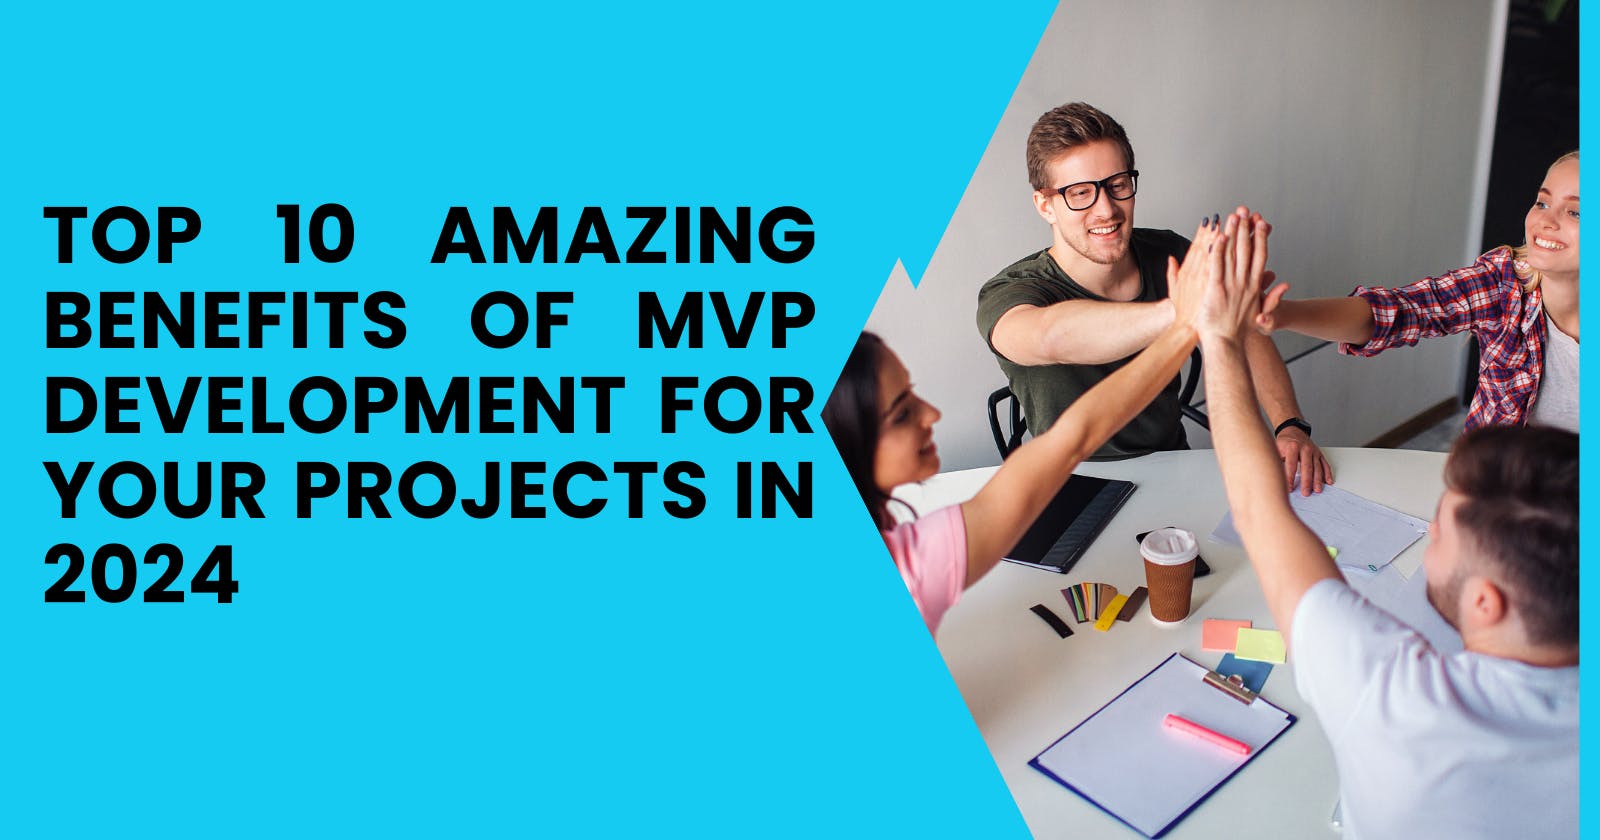 Top 10 Amazing Benefits of MVP Development for Your Projects in 2024